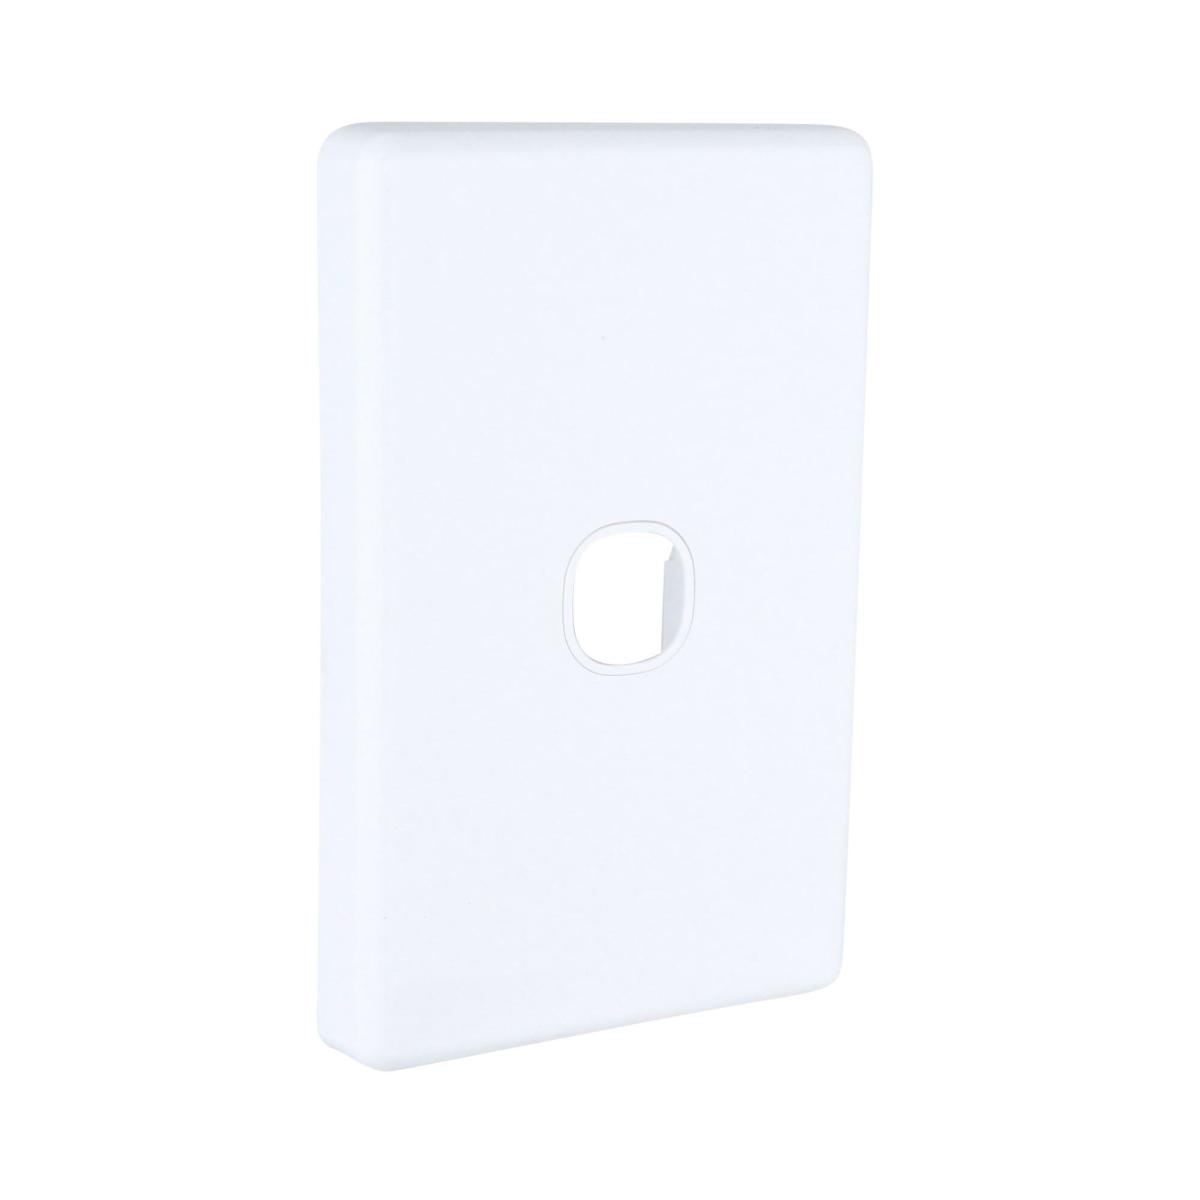 C2000 PLATE GRID & COVER 1G WHITE